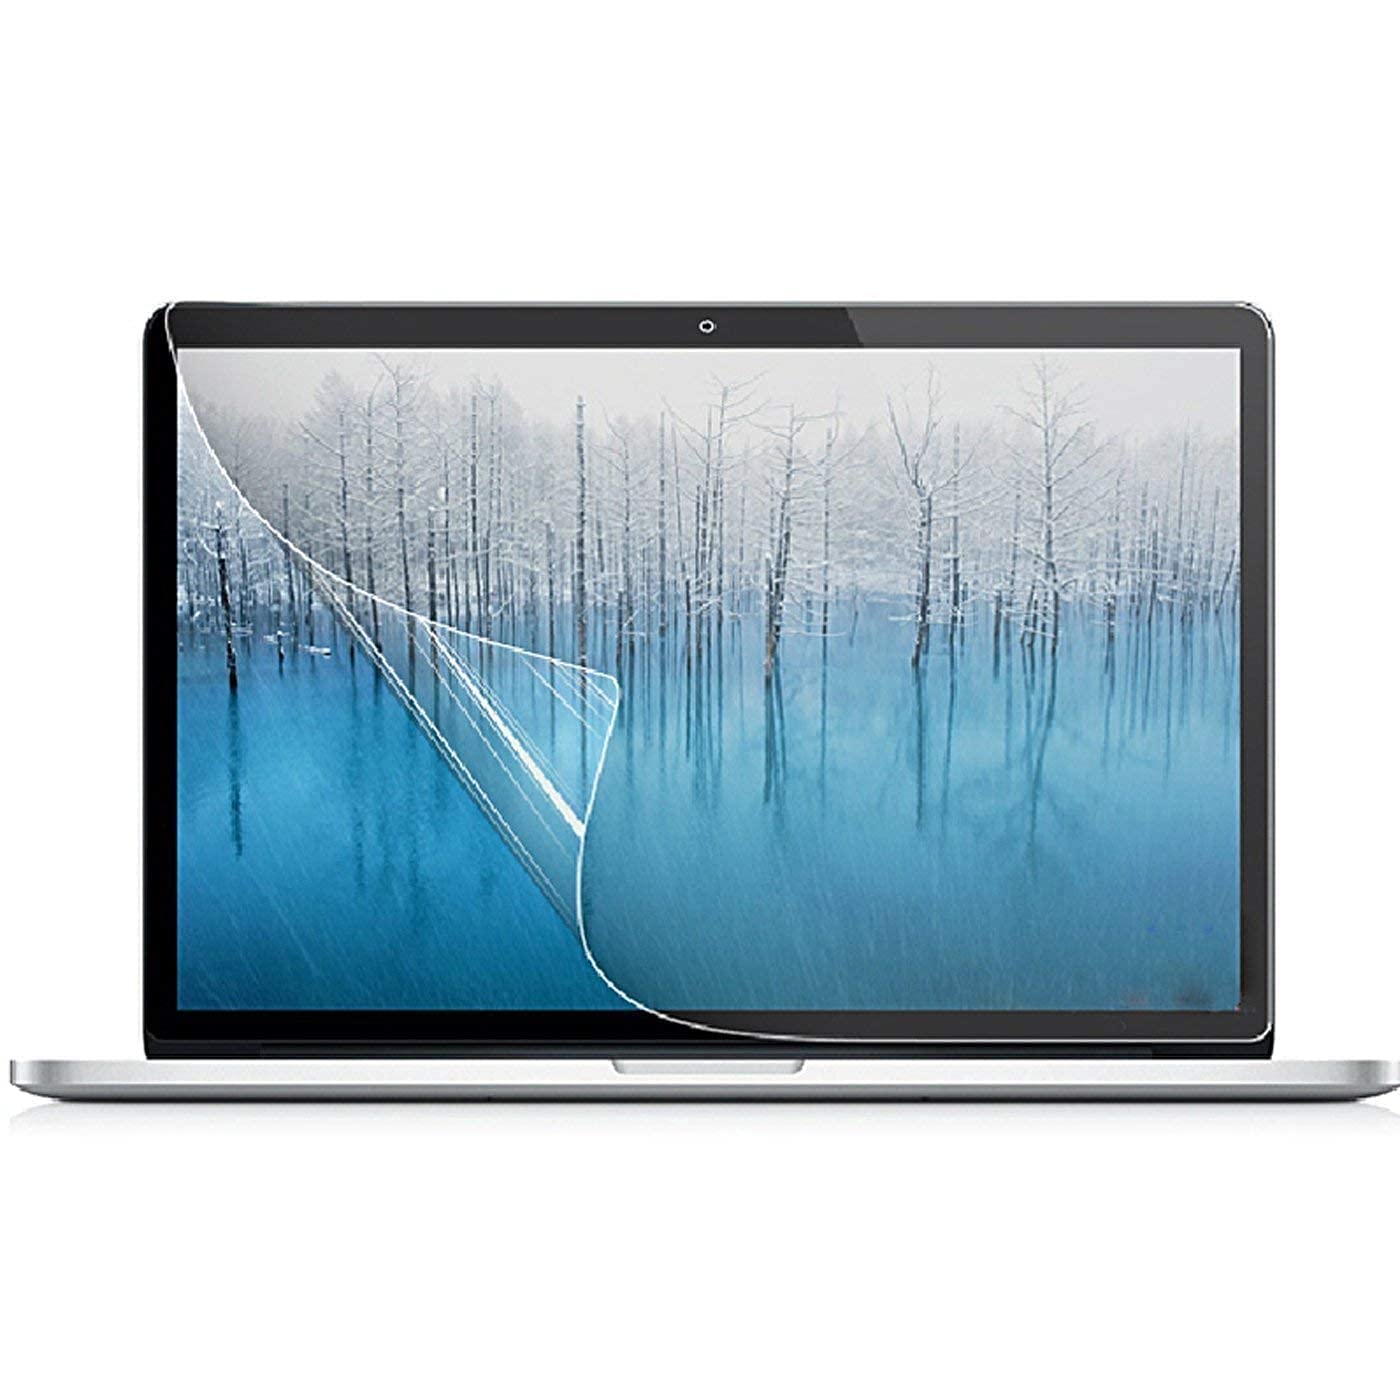 Protect your laptop screen with a high-quality screen protector
Prevent scratches, smudges, and fingerprints from affecting your display